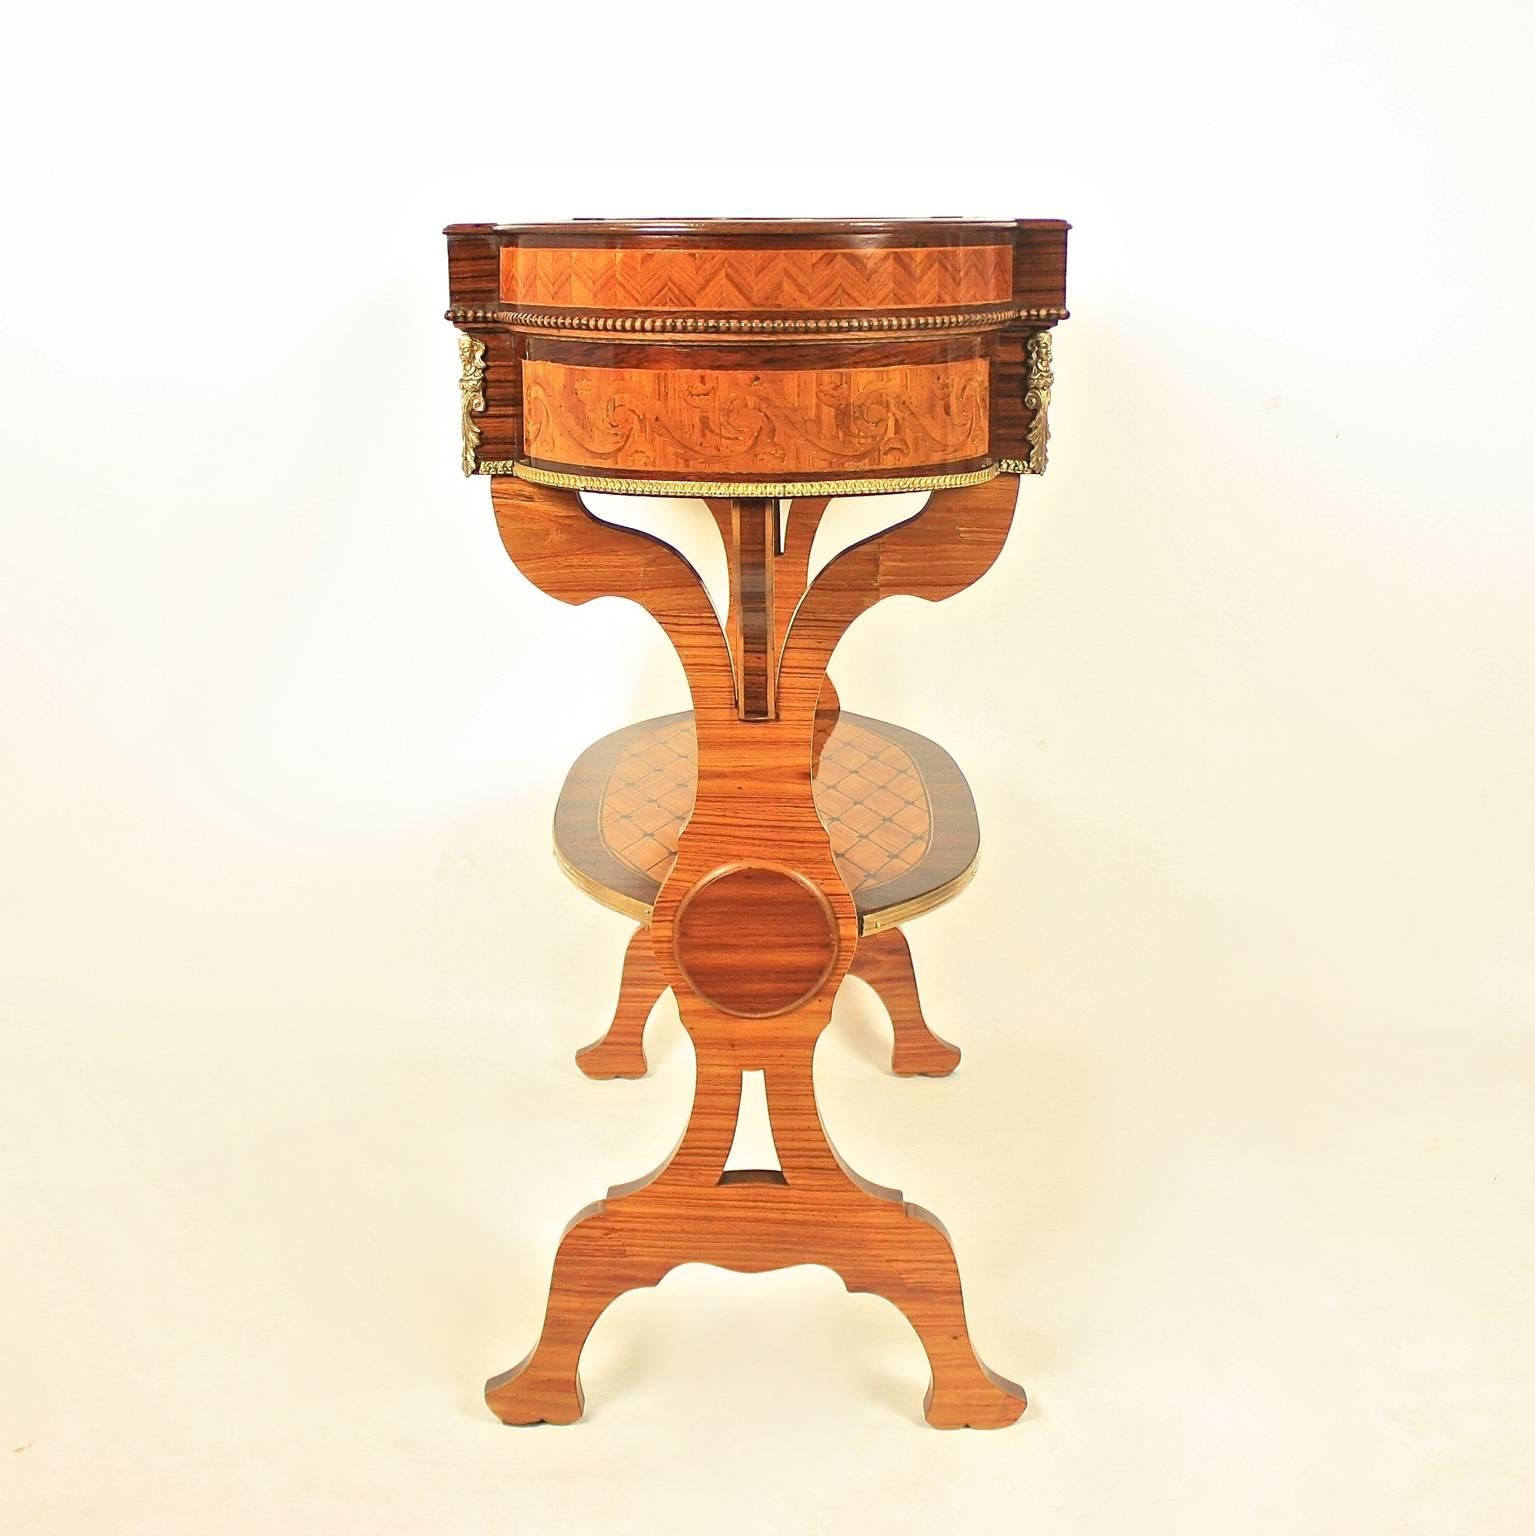 Mahogany Louis XVI Style Marquetry Side Table after a Design by J.H. Riesener